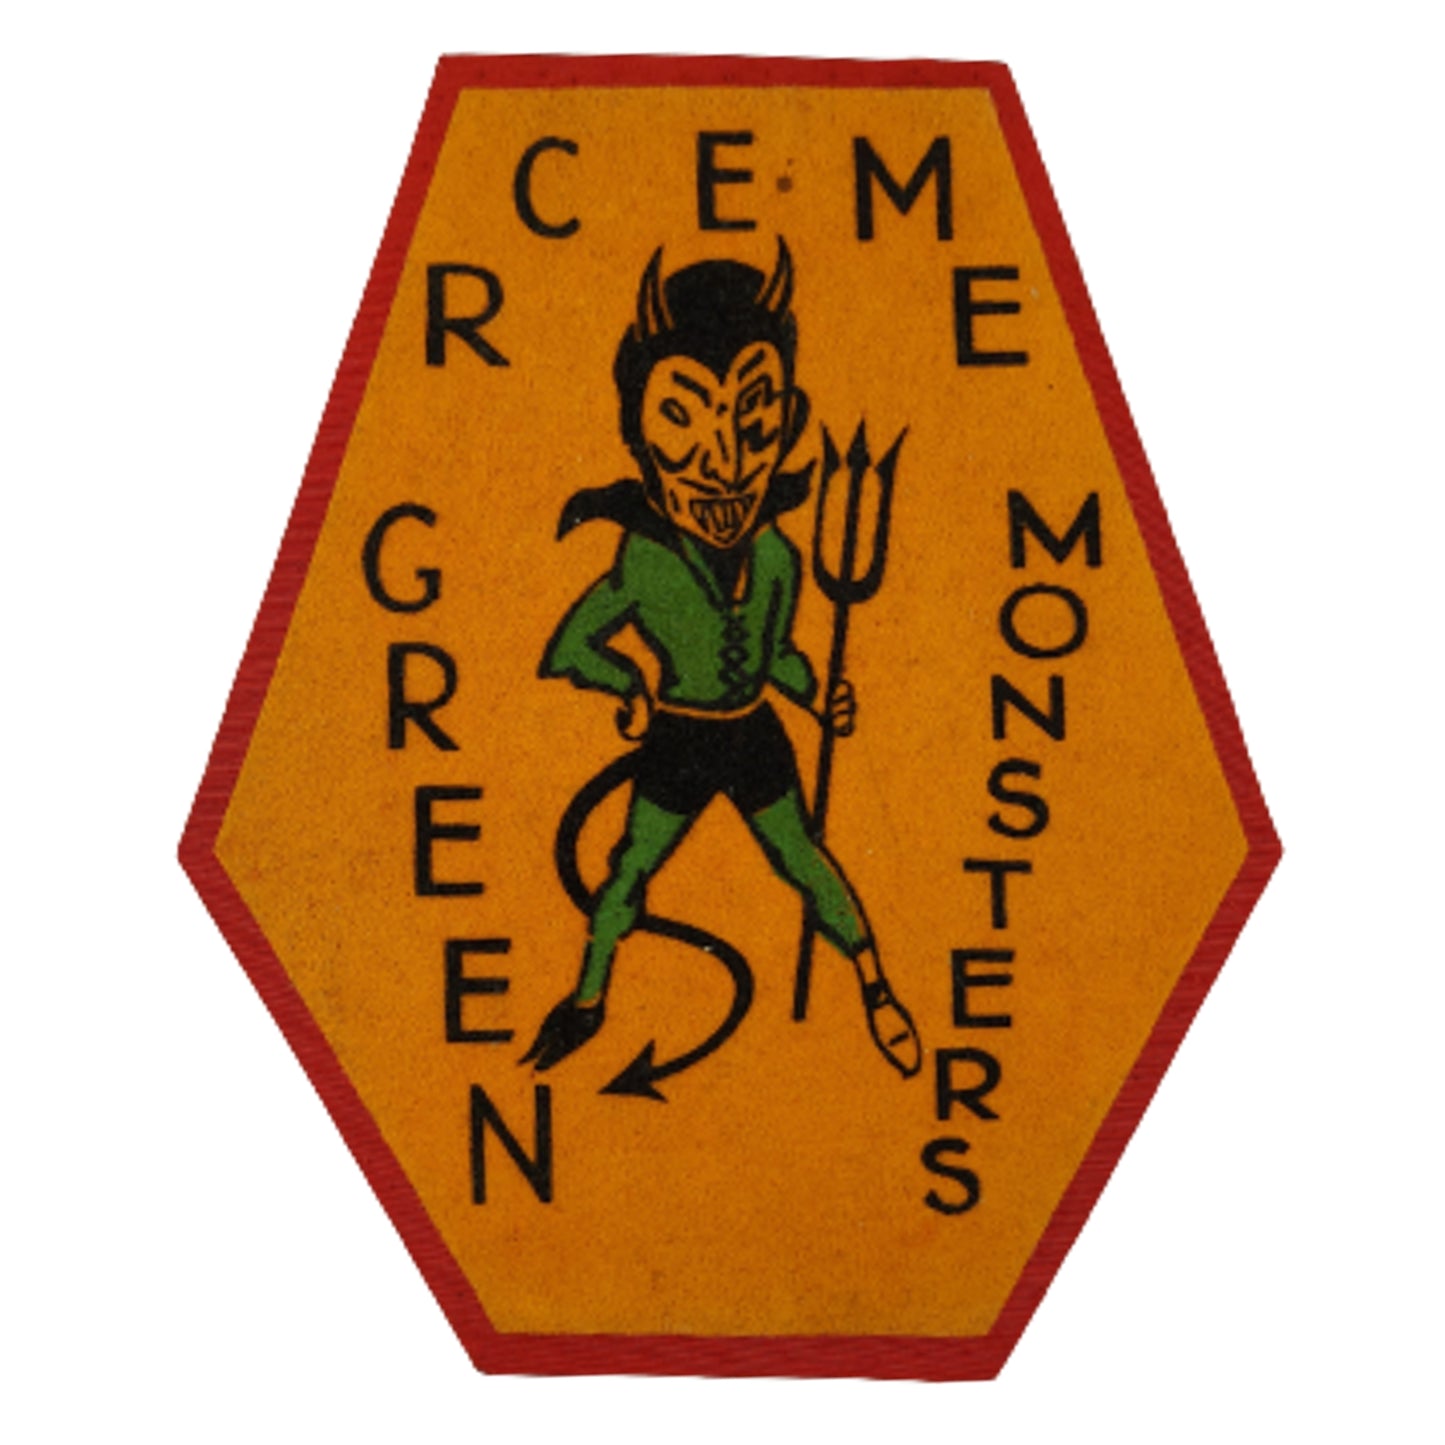 Post WW2 RCEME Royal Canadian Electrical Mechanical Engineers Jacket Crest - Green Monsters